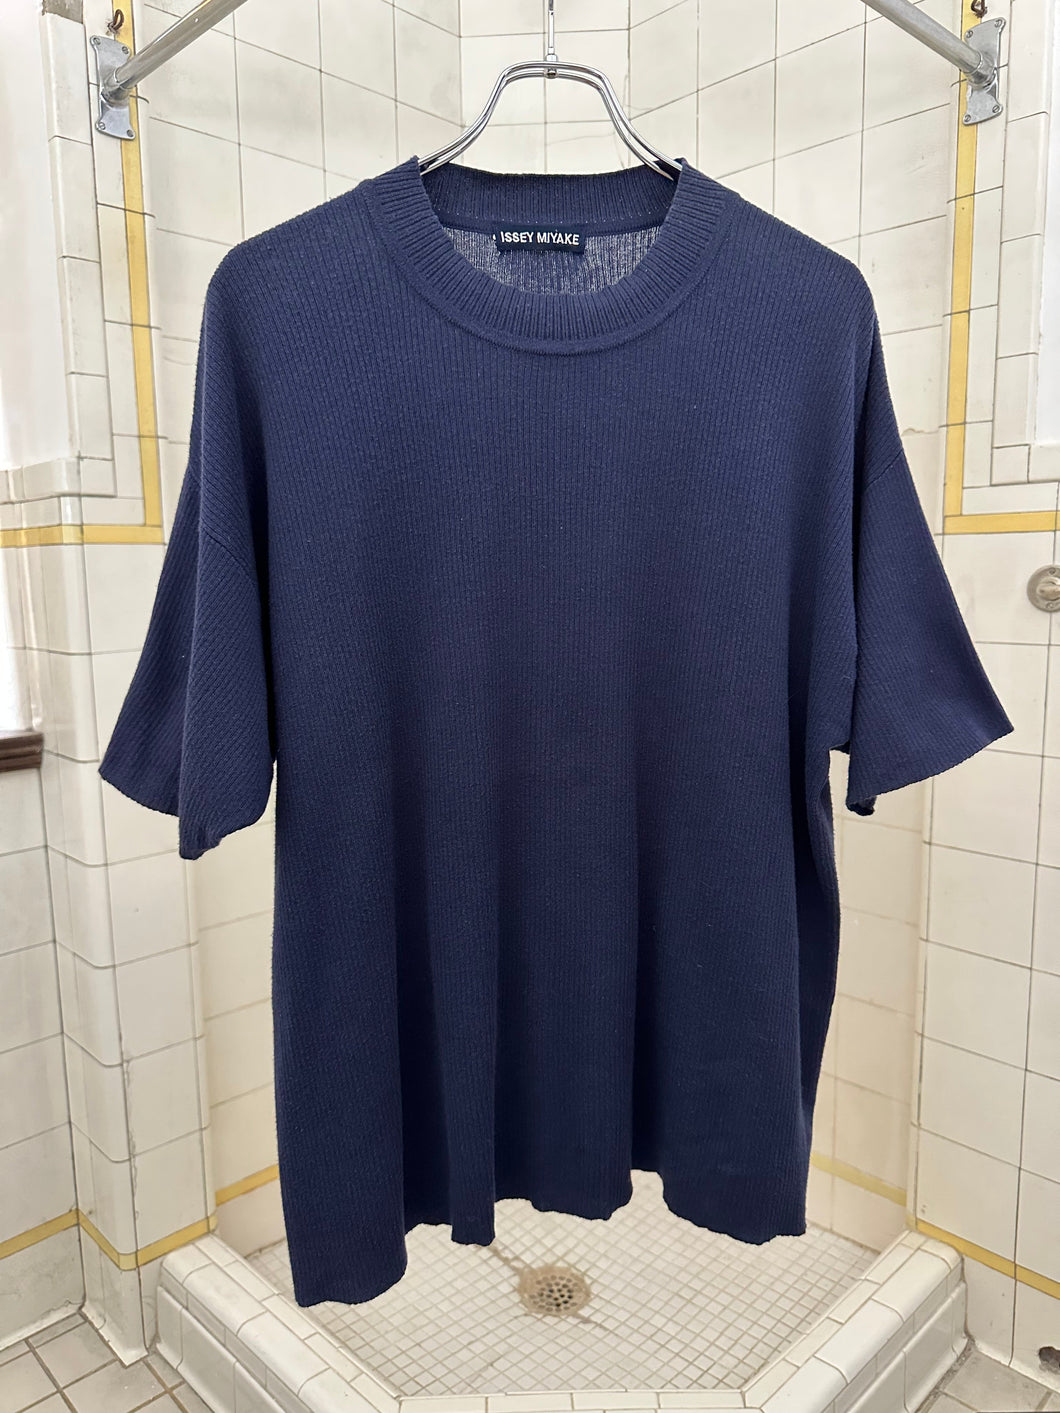 ss1994 Issey Miyake Ribbed Featherweight Tee - Size M